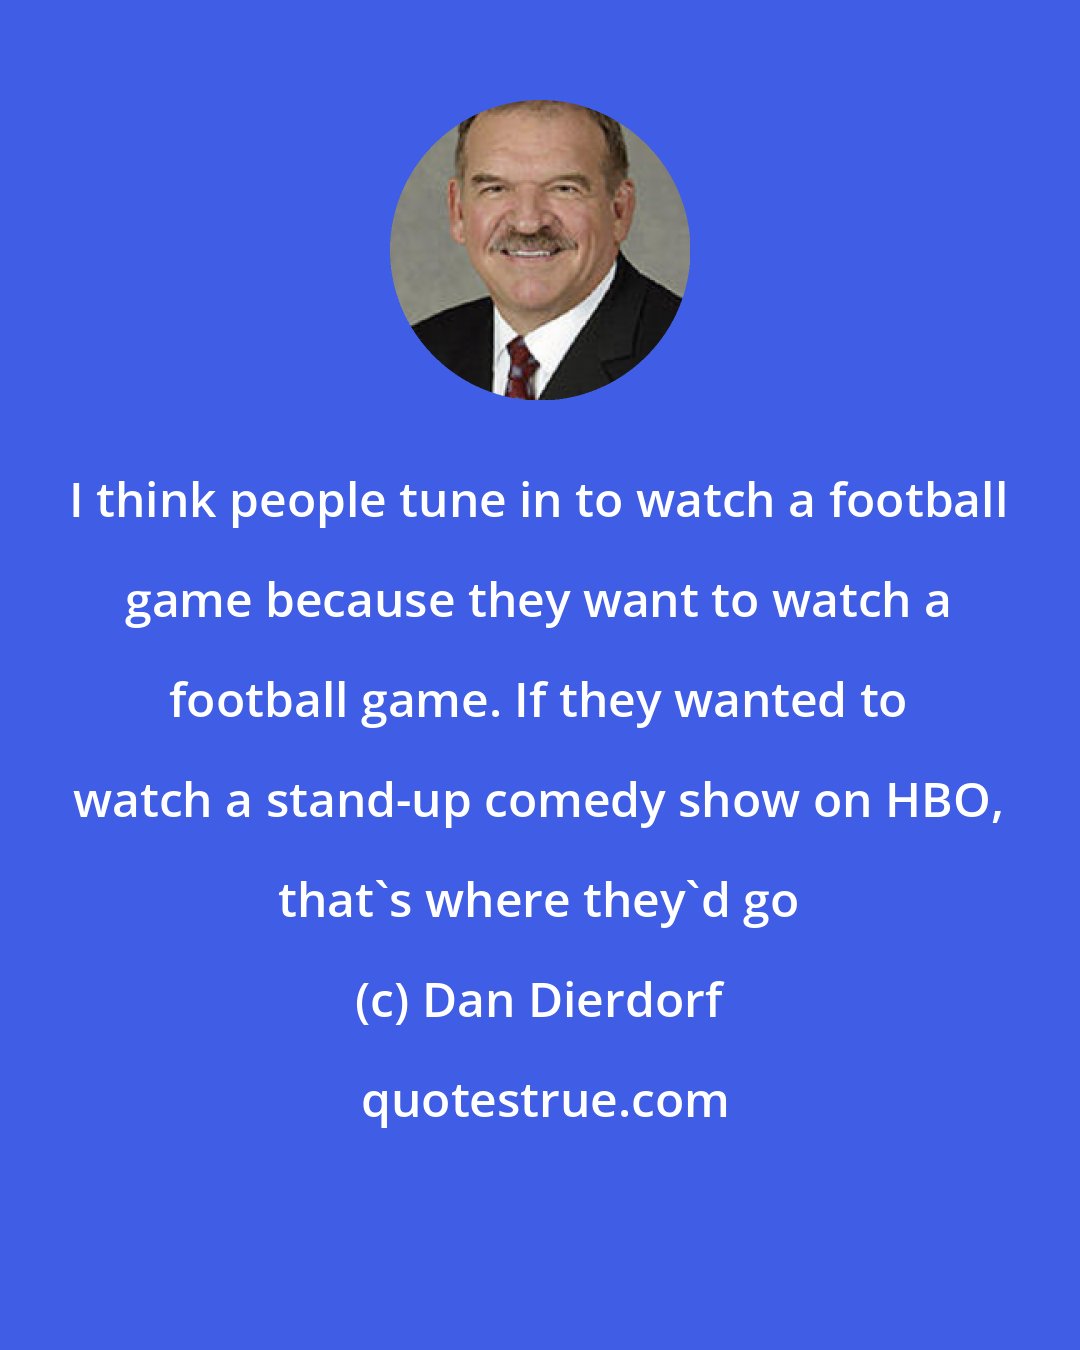 Dan Dierdorf: I think people tune in to watch a football game because they want to watch a football game. If they wanted to watch a stand-up comedy show on HBO, that's where they'd go